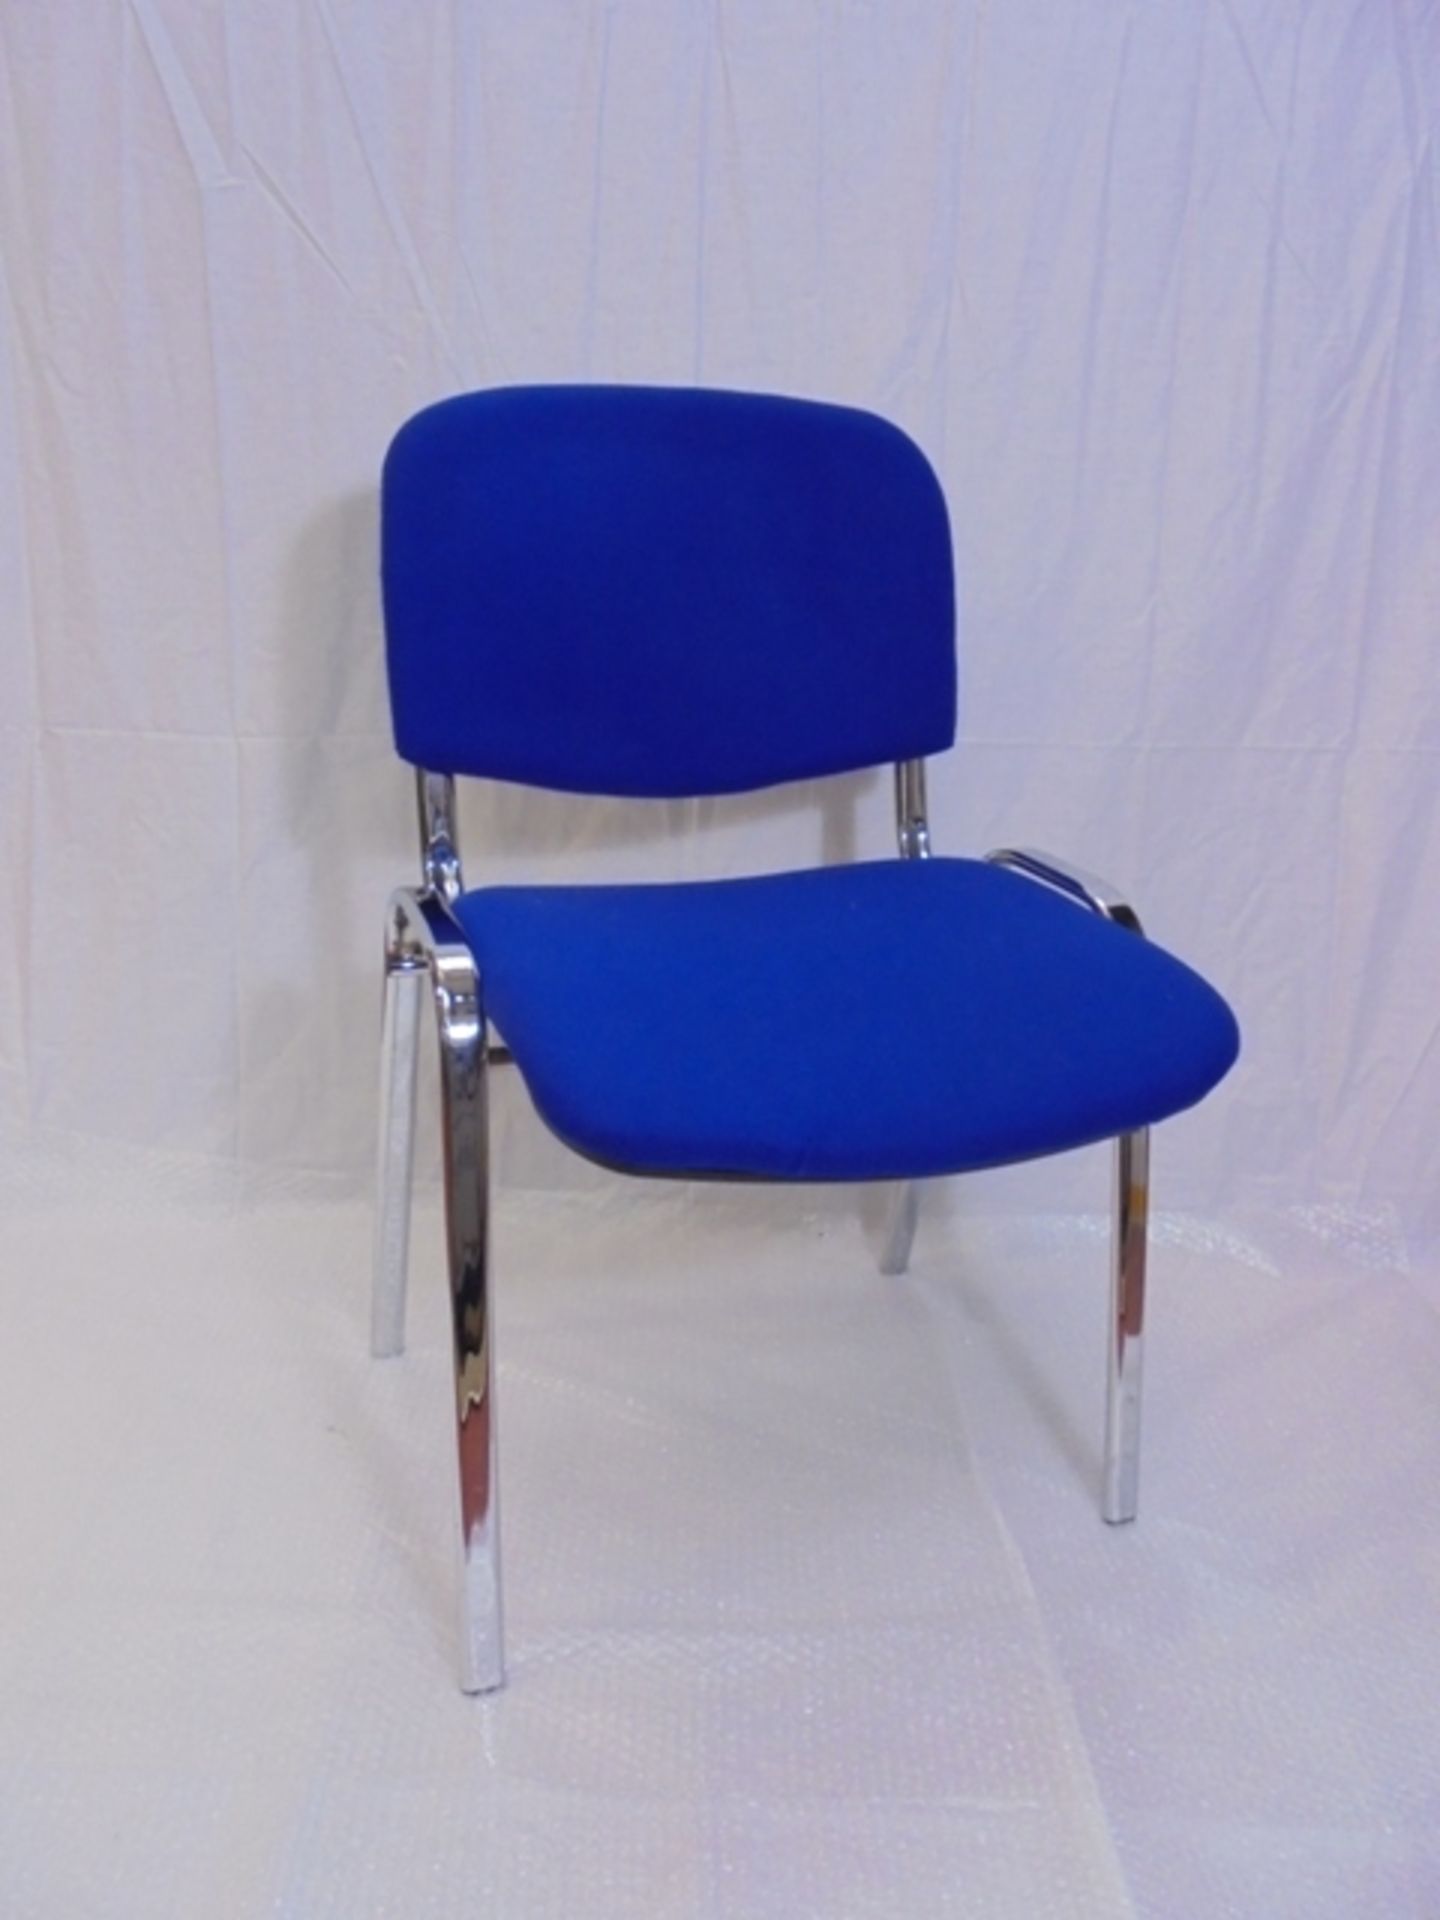 1 x Chrome Frame and Blue Hopsack Stacking Reception Chair.